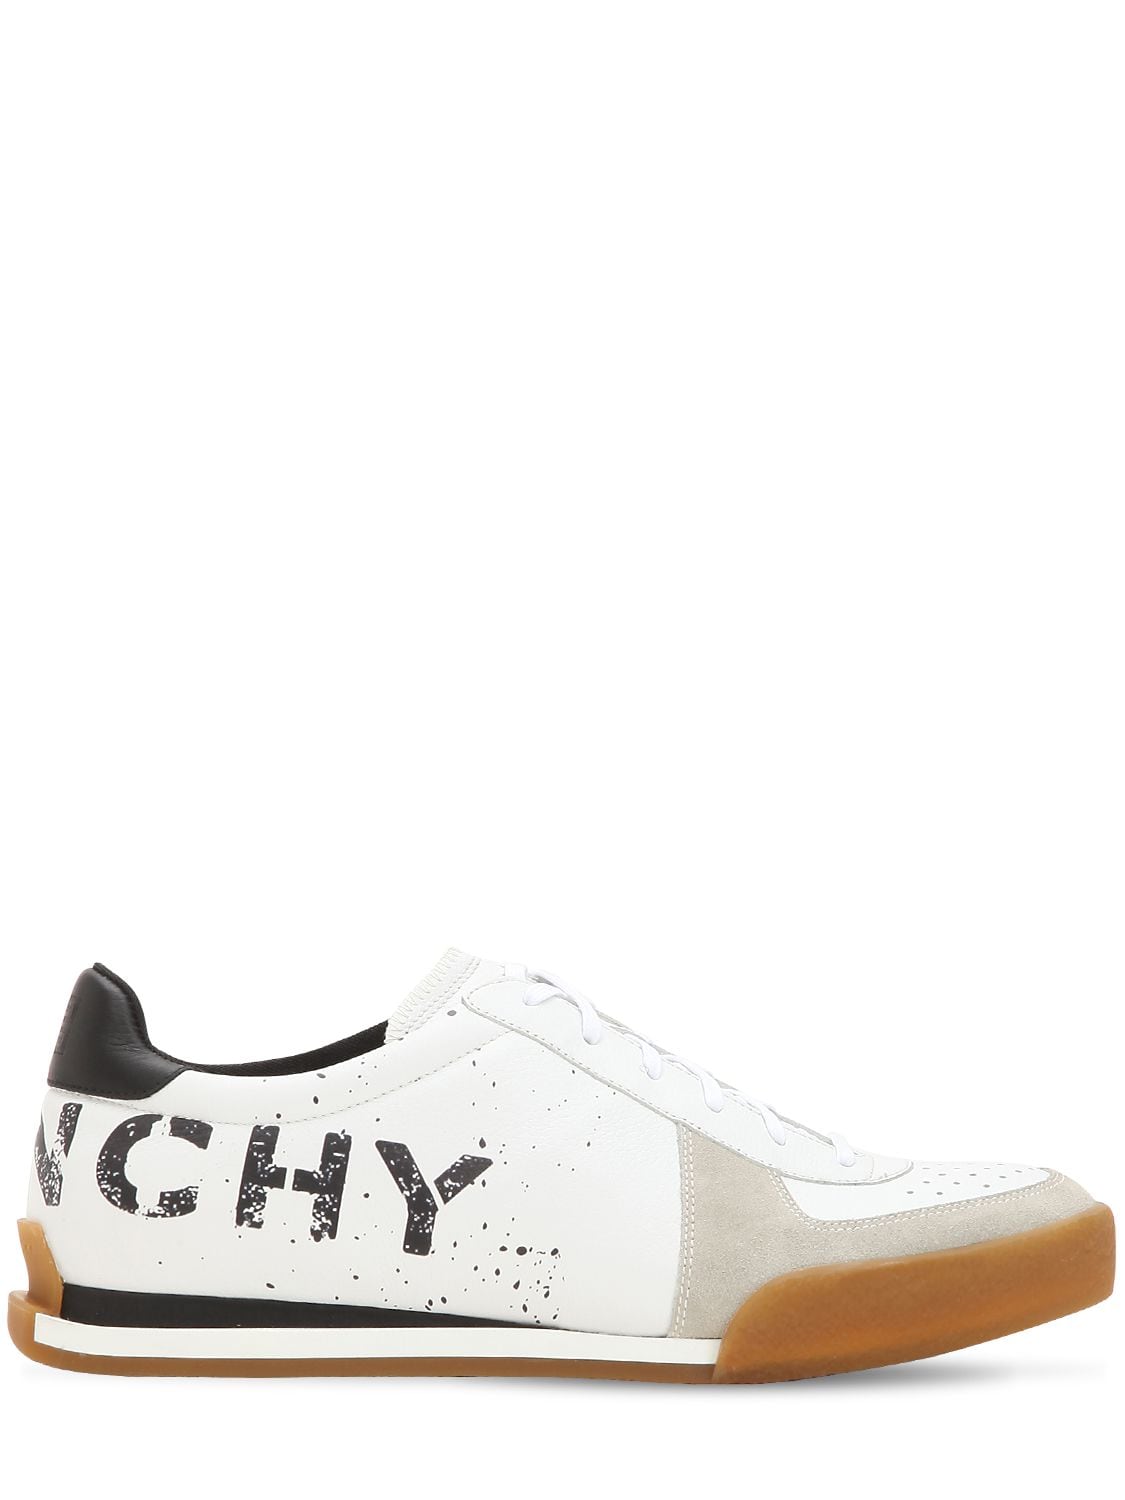 GIVENCHY LOGO LEATHER TENNIS trainers,68ILE1006-MTE20